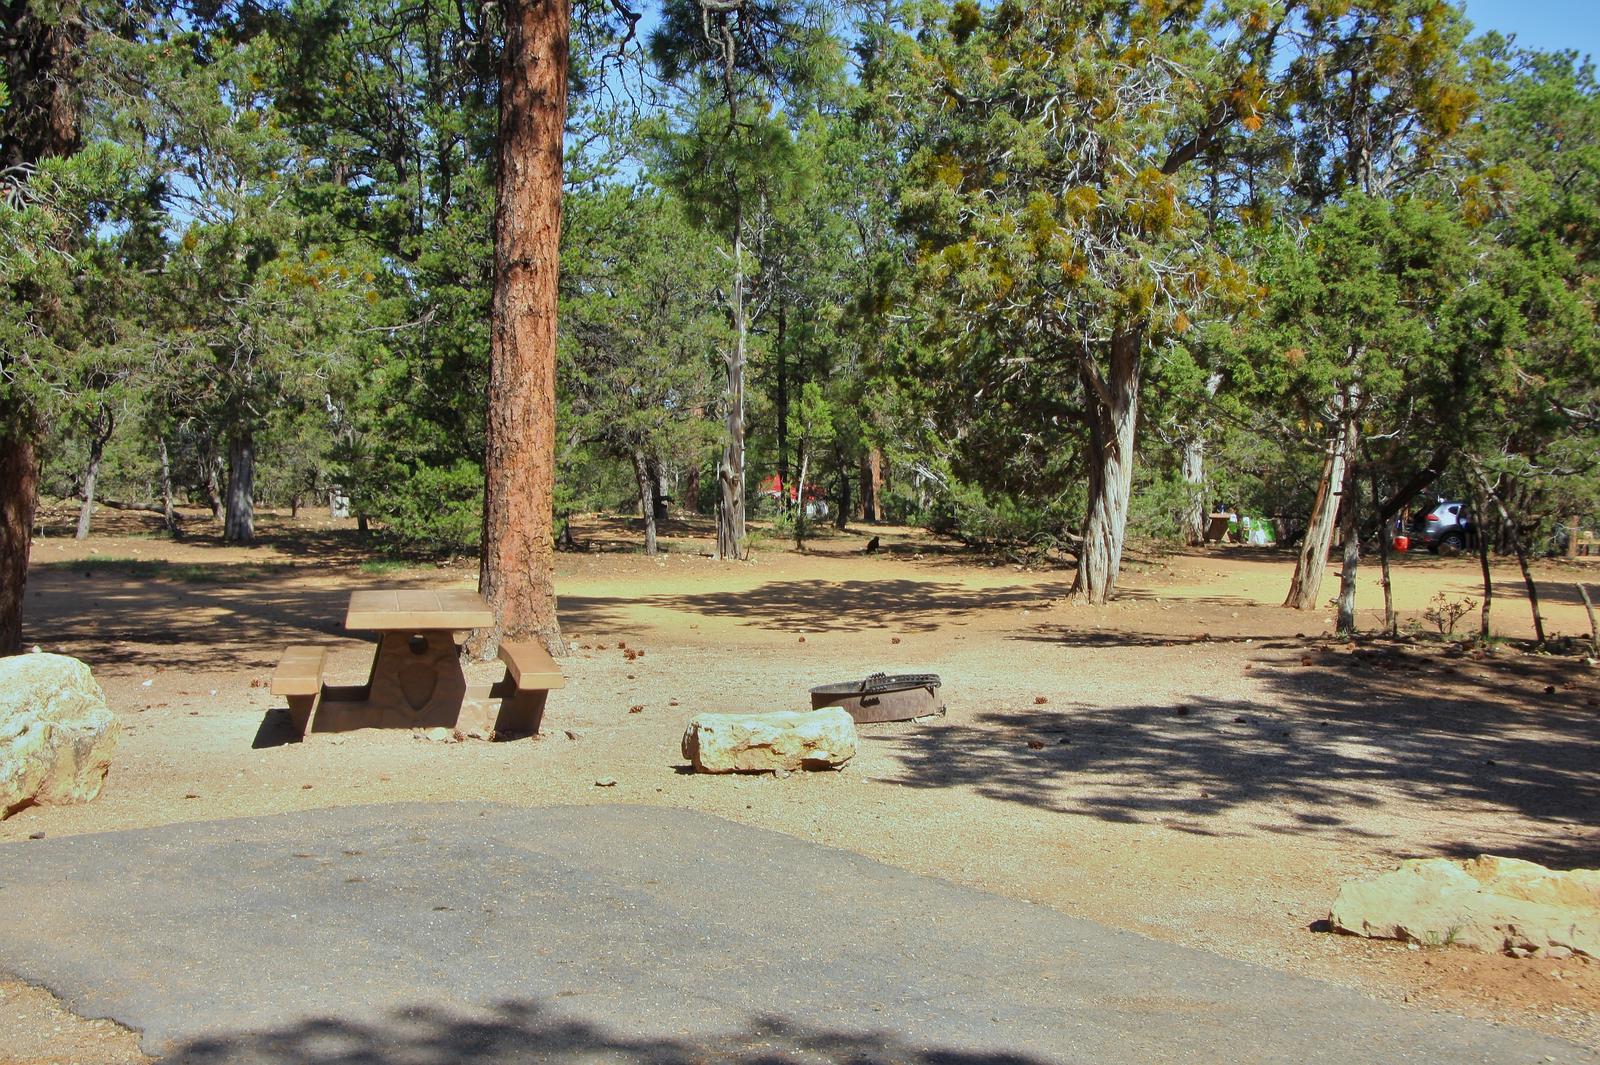 Picnic table, fire pit, and park spot, Mather CampgroundPicnic table, fire pit, and park spot for Oak Loop 248, Mather Campground